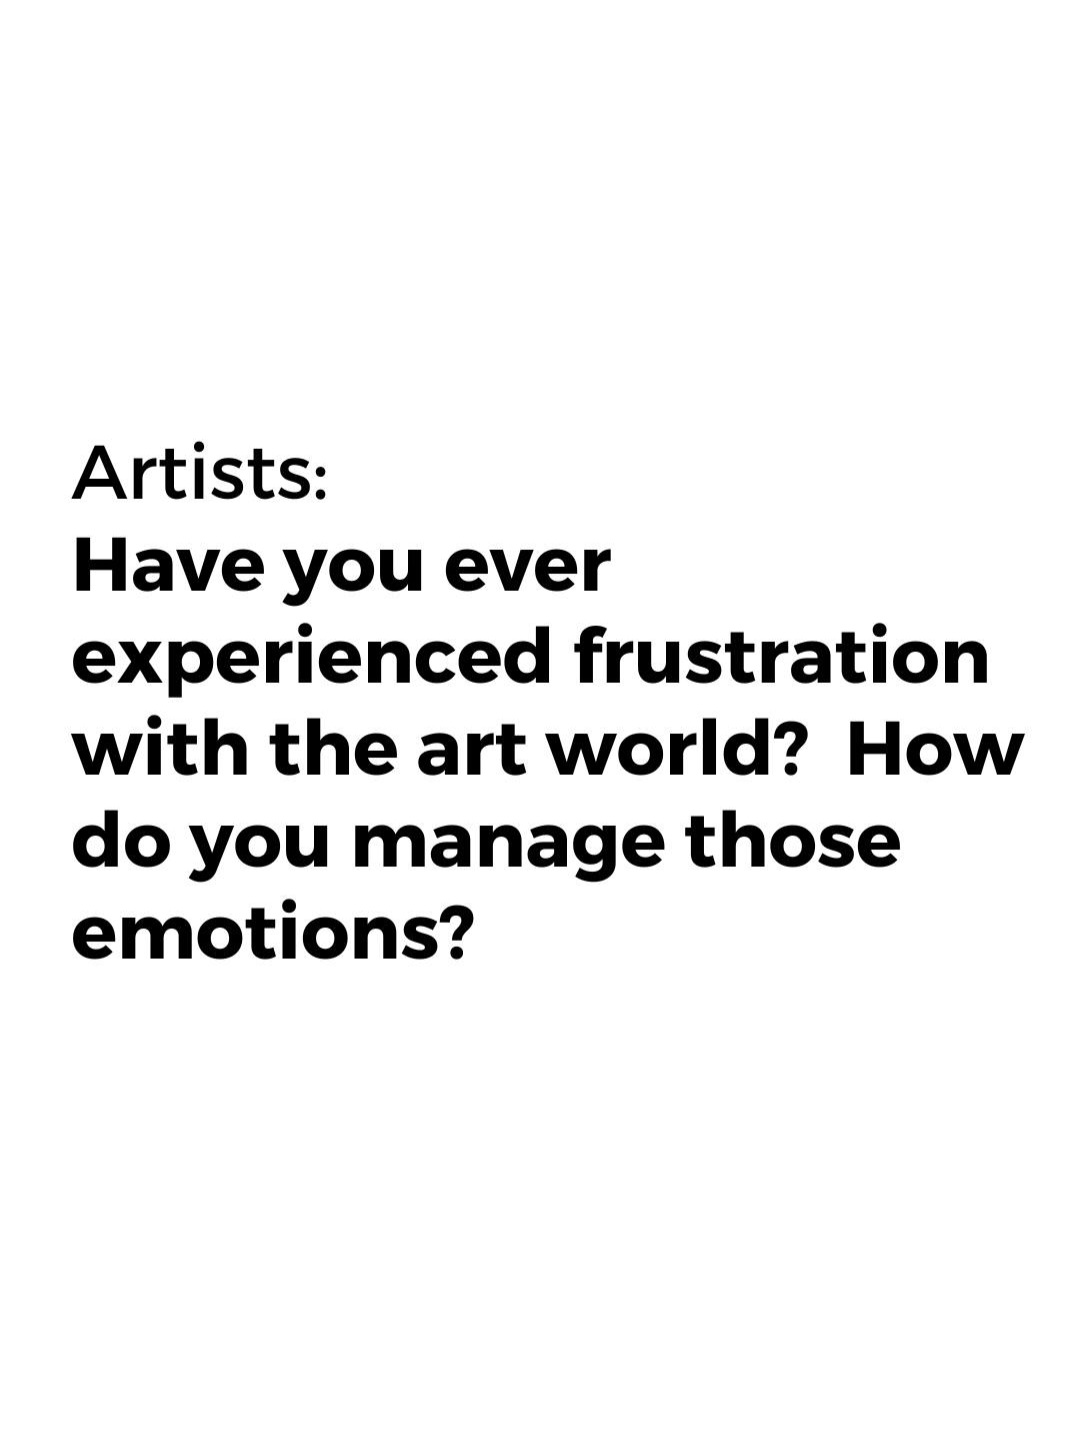 Frustration in the art world 